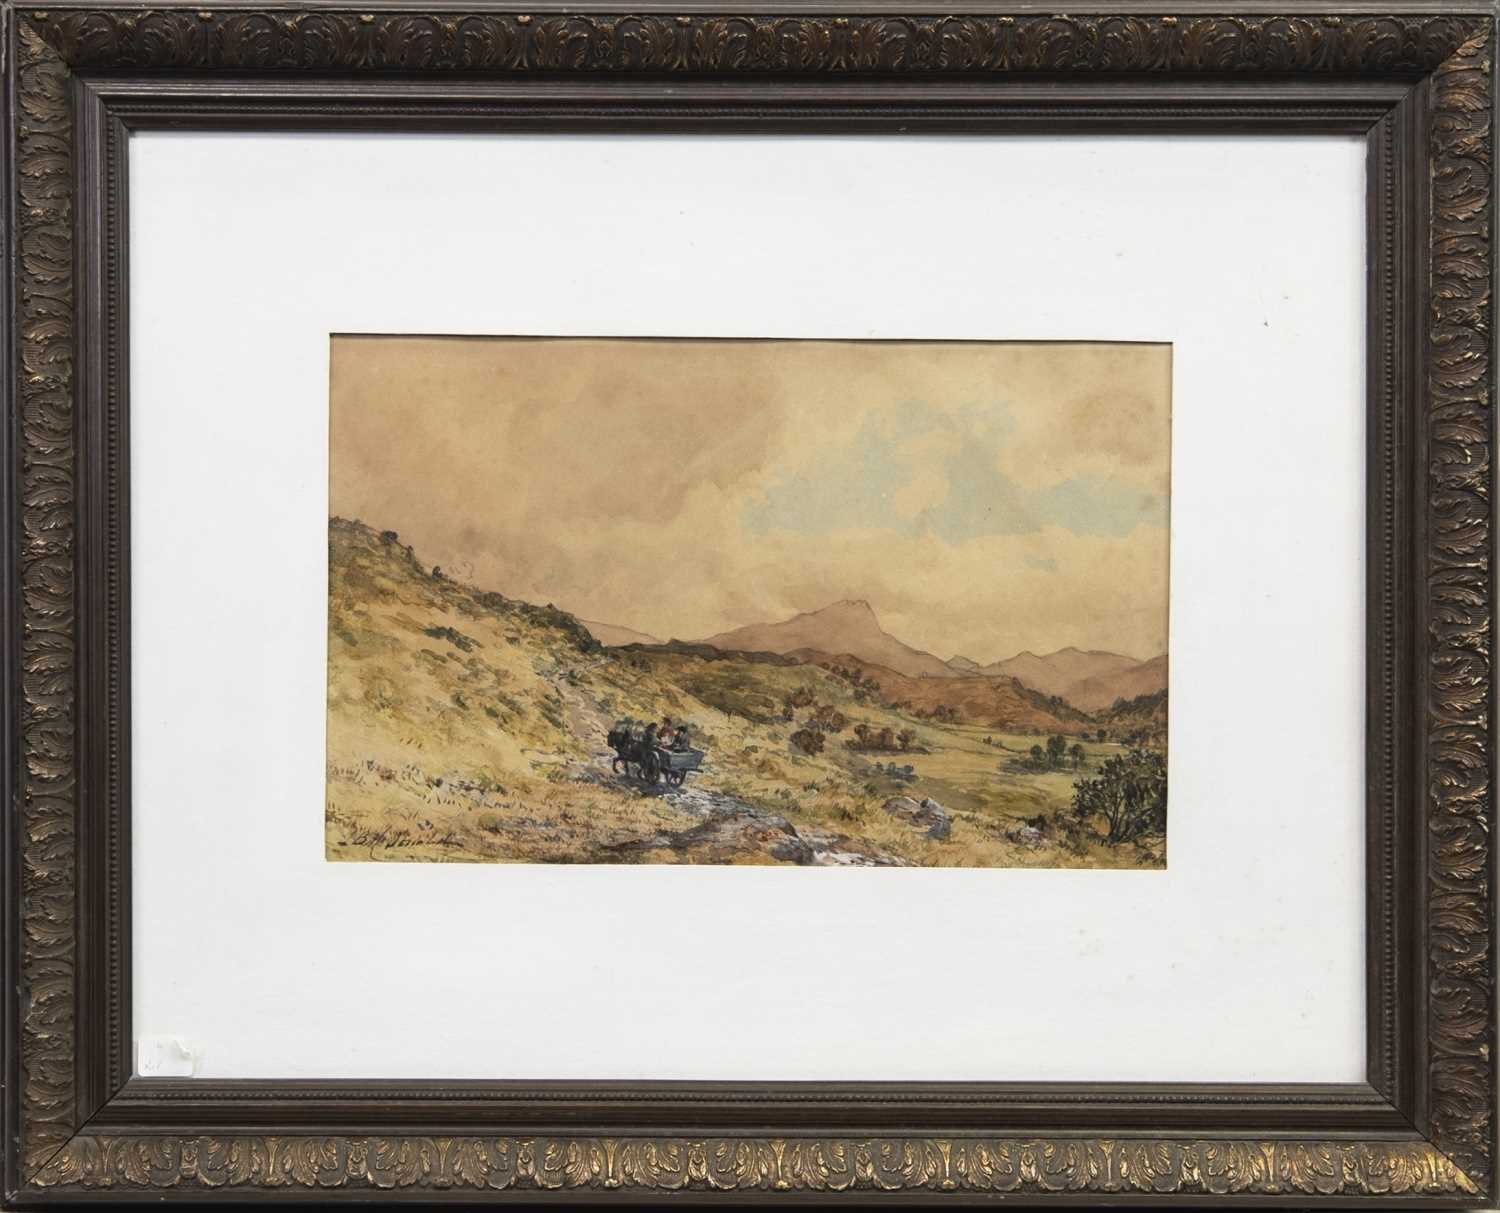 Lot 23 - LOCH VAIL WITH BEN LOMOND IN THE DISTANCE, A WATERCOLOUR BY JOHN BLAKE MACDONALD